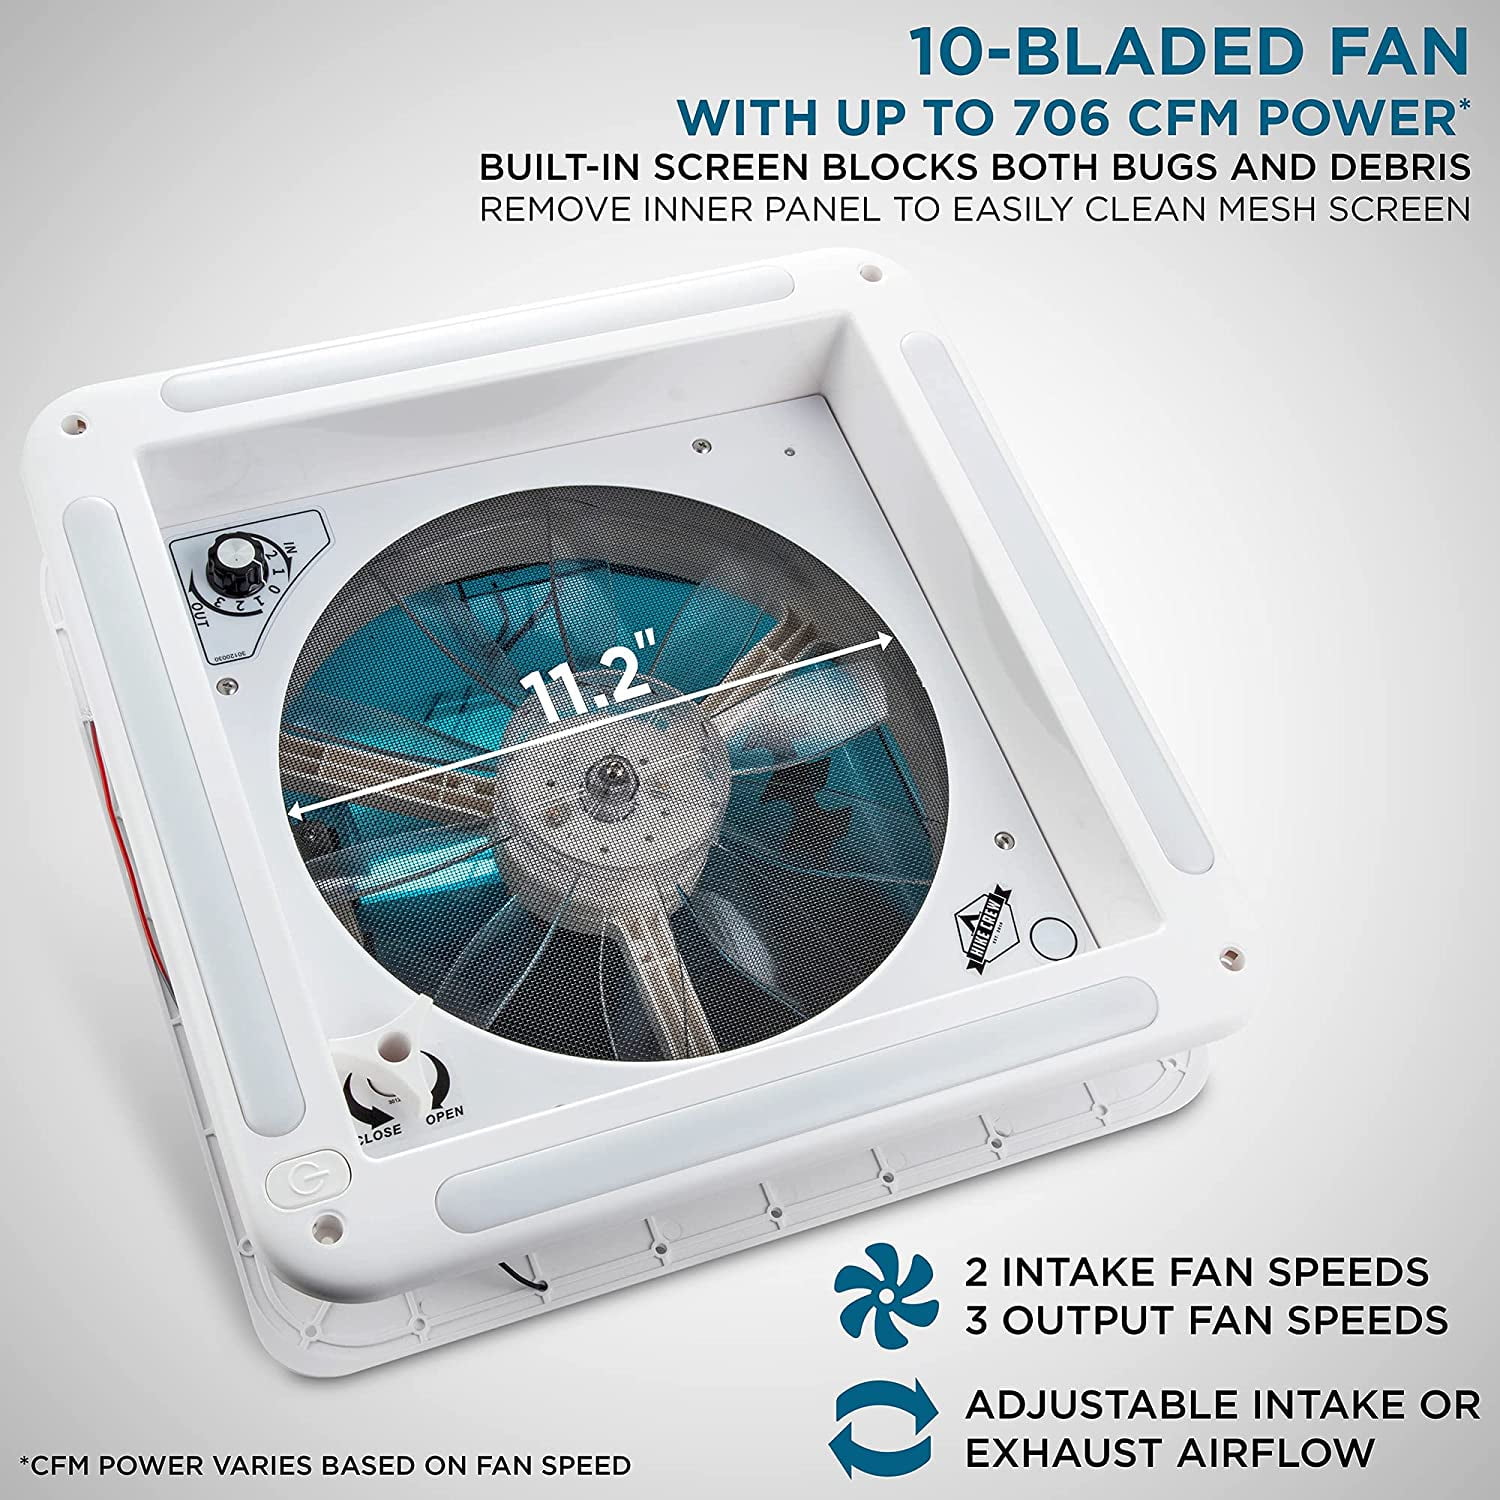 Hike Crew 14” RV Roof Vent Fan with LED Light Rain Sensor & Electric Open/Close Remote Includes Screws & Garnish Auto Temperature 12V 6-Speed Motorhome Fan Smoked Lid Intake & Exhaust 